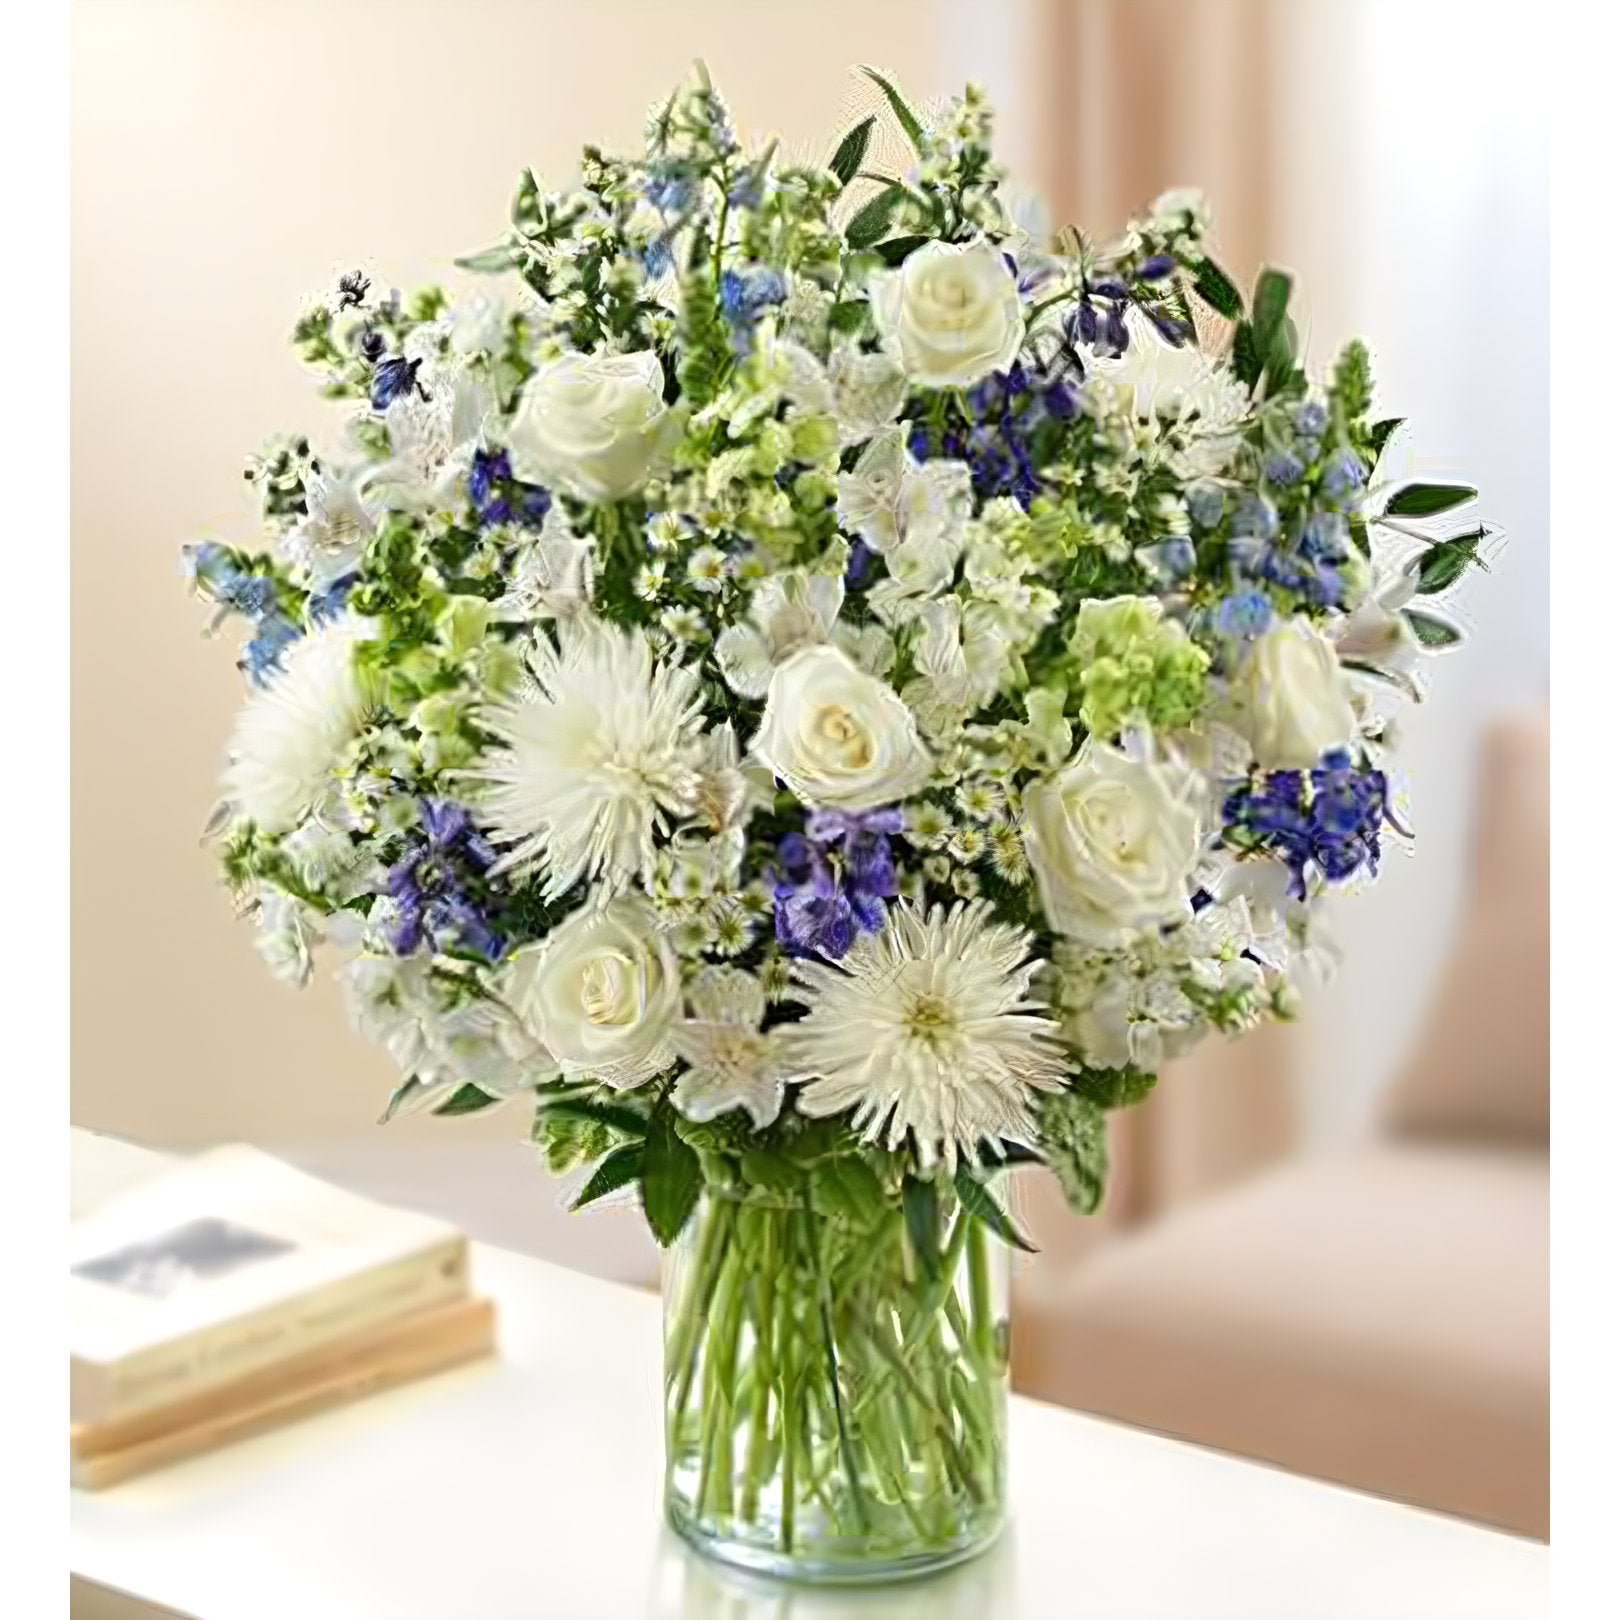 Sincerest Sorrow - Blue and White - Funeral > Vase Arrangements - Queens Flower Delivery